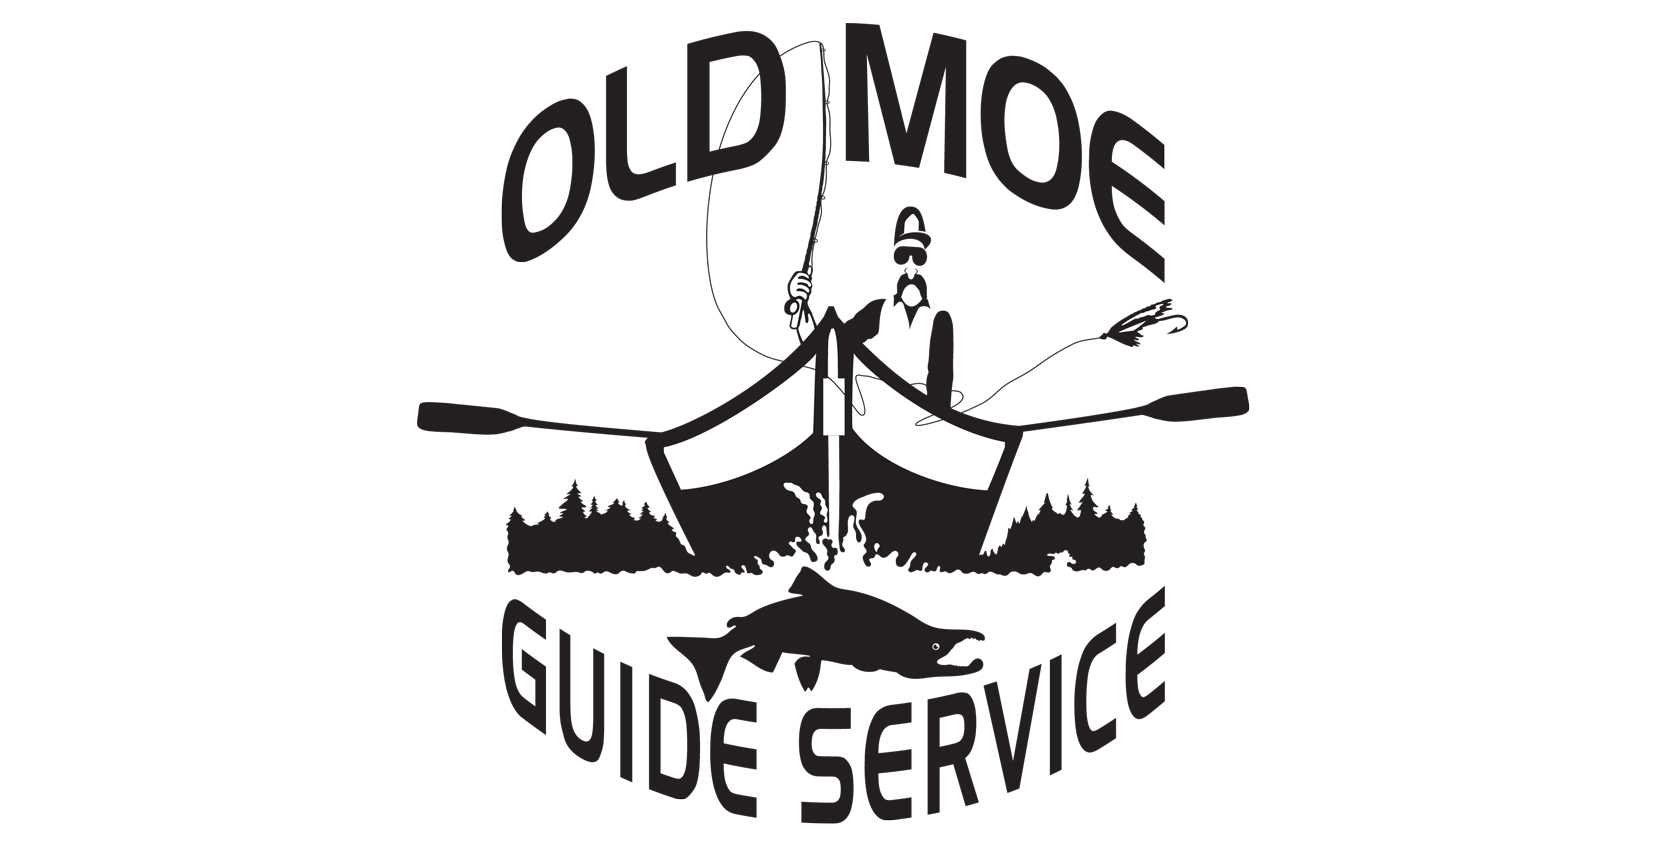 Old Moe – Guide Service